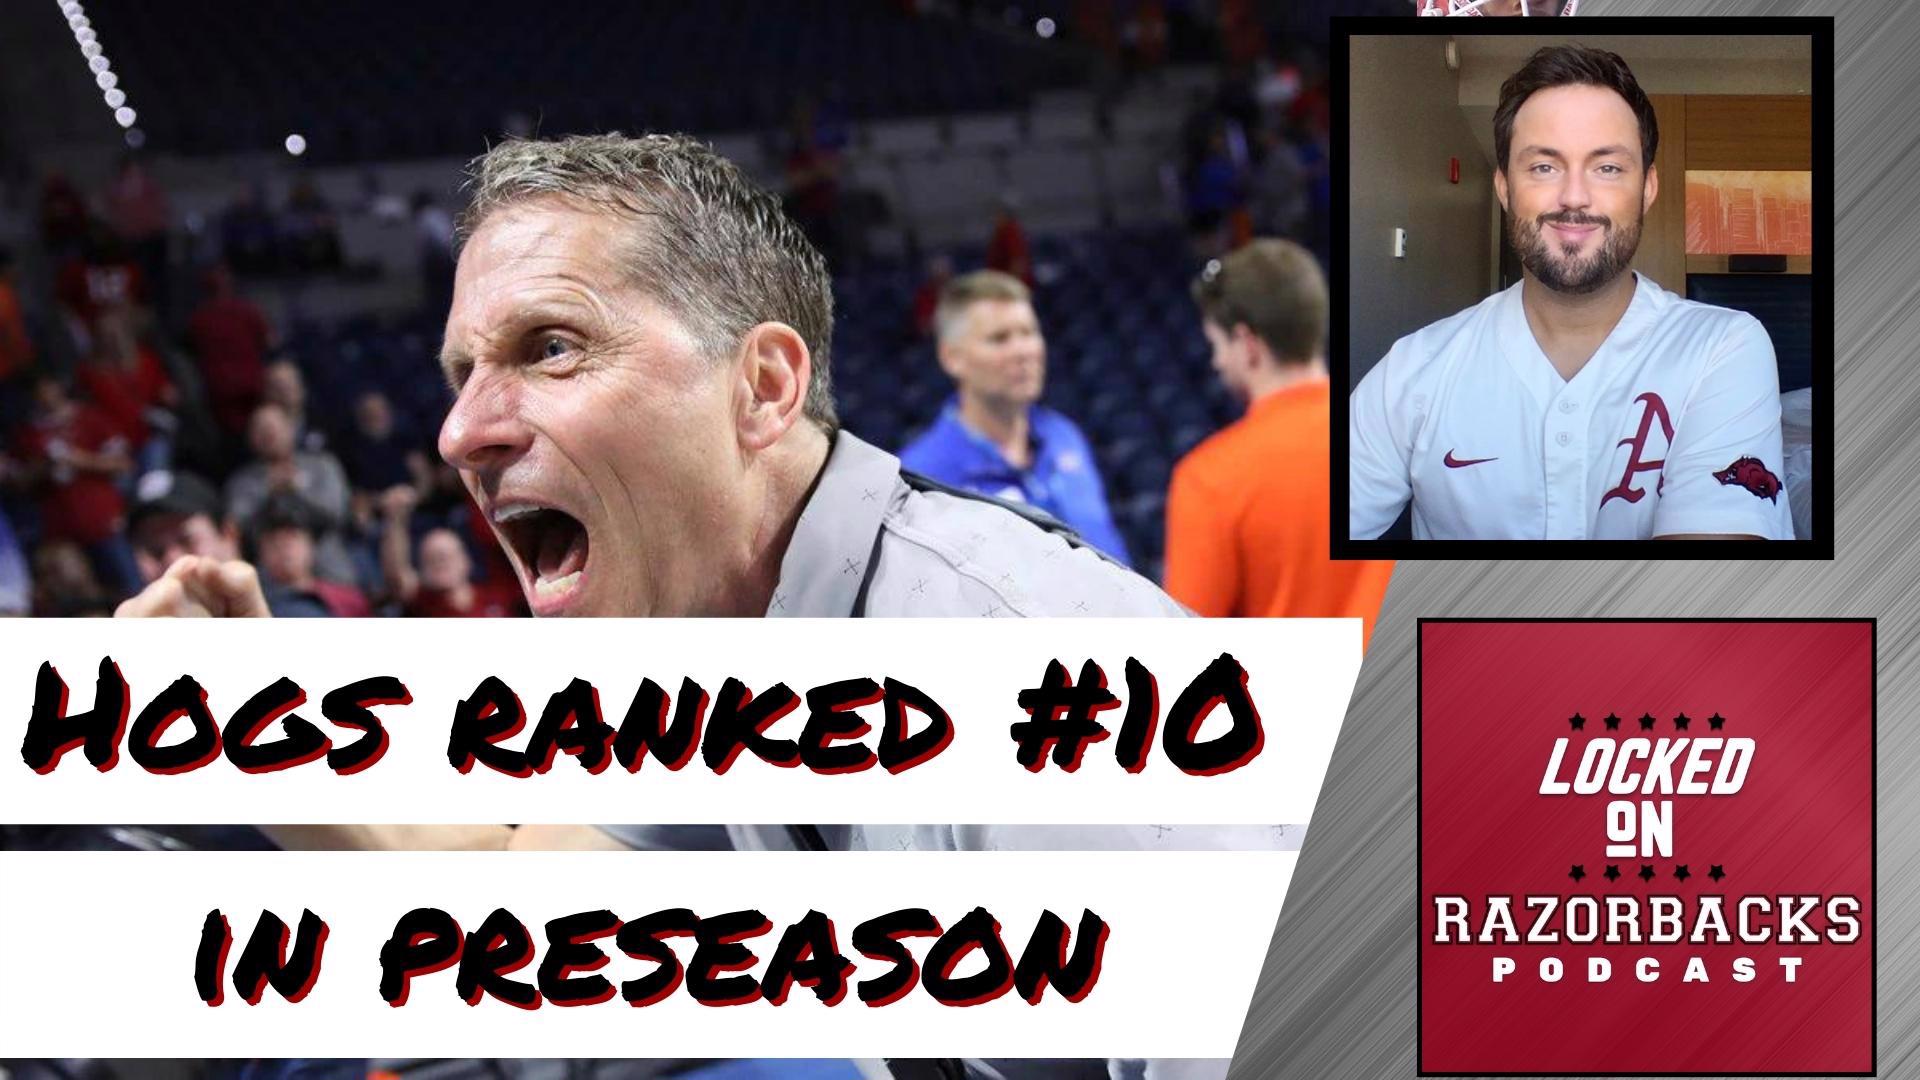 John Nabors discusses Eric Musselman and the Razorback Basketball team being ranked 10th in the country.